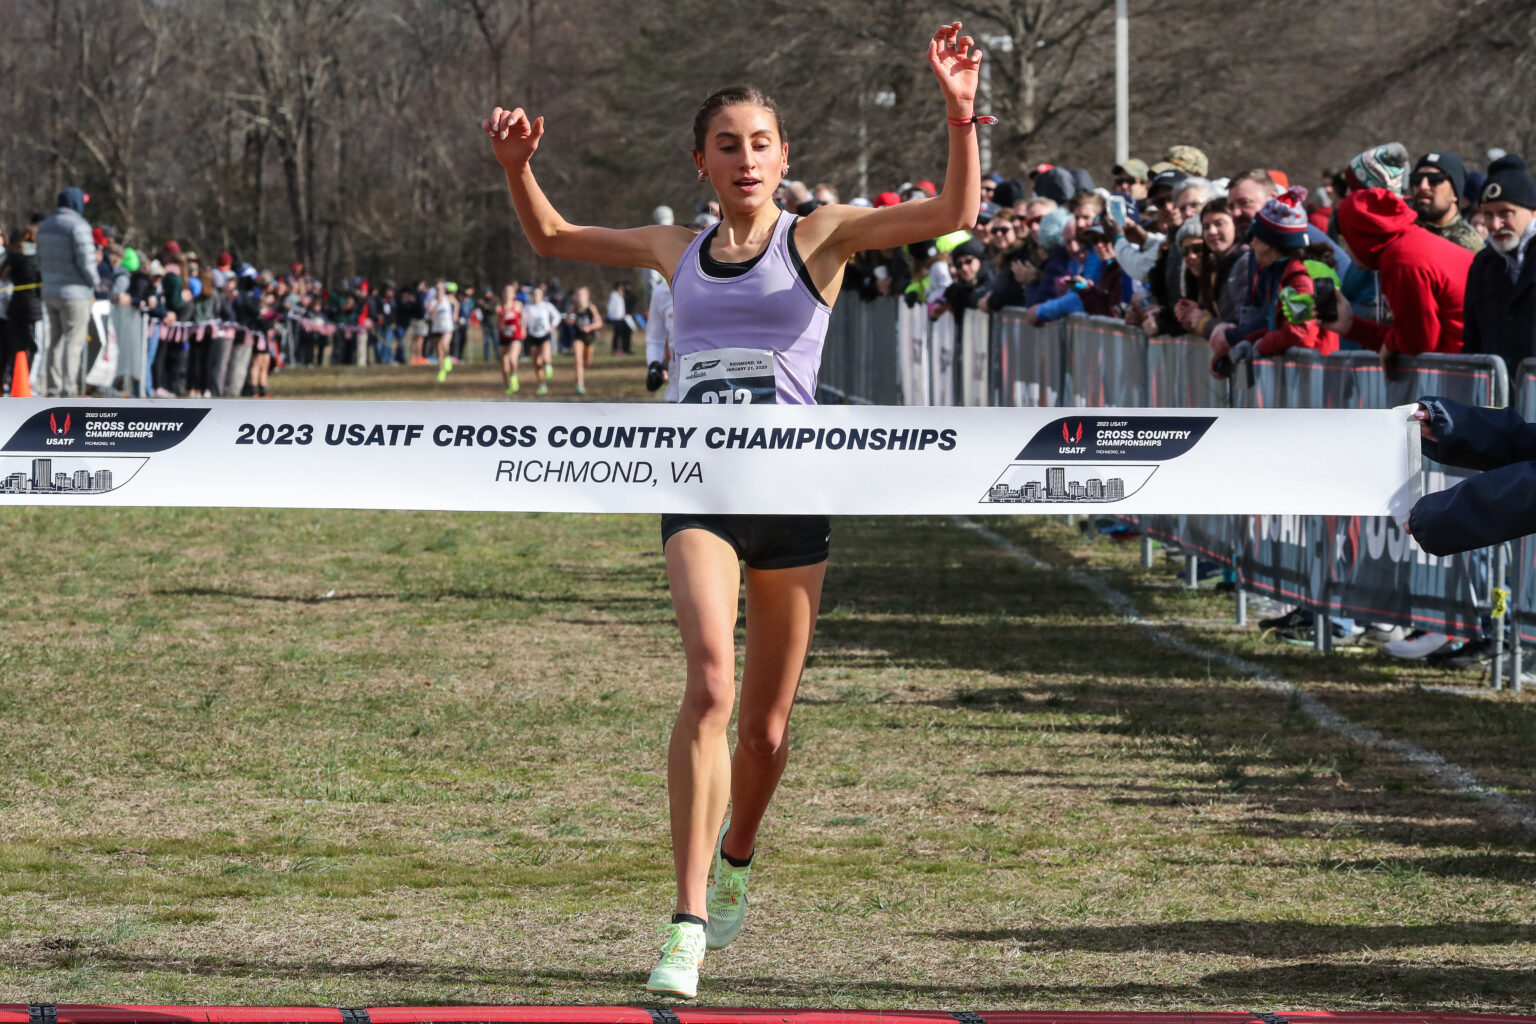 Leo Young and Irene Riggs Win U20 USATF Cross Country Titles